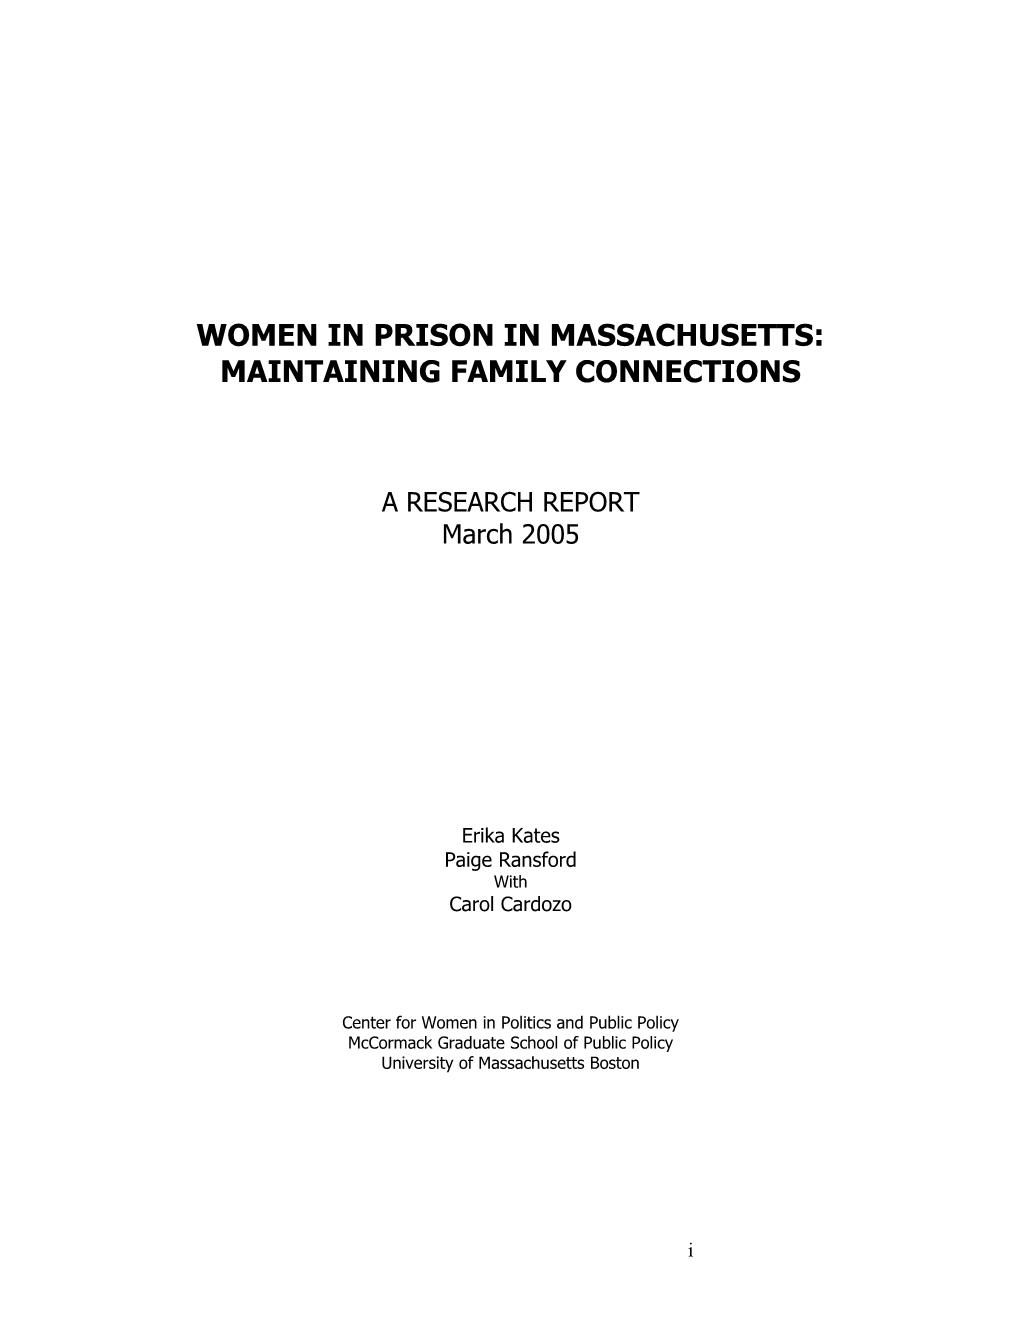 Women in Prison in Massachusetts: Maintaining Family Connections